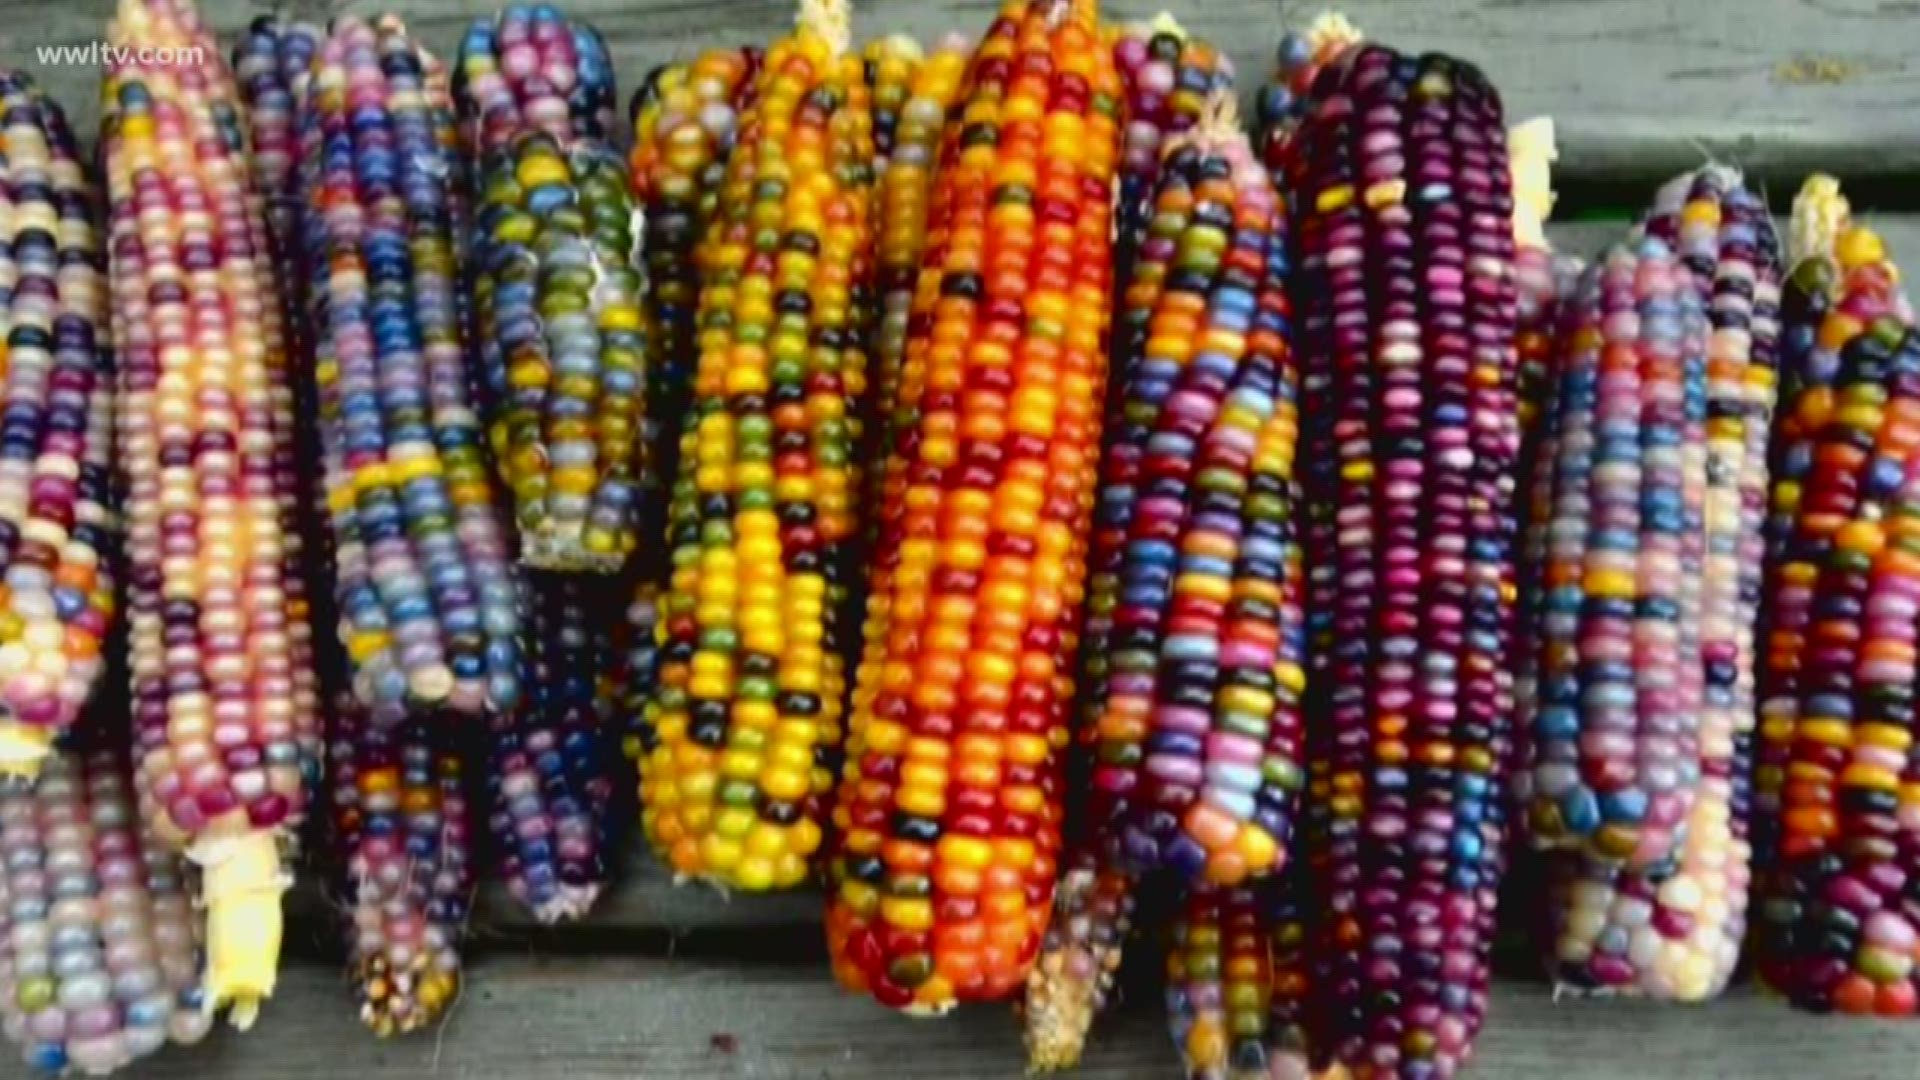 Are you looking to grown your own Ornamental Corn?